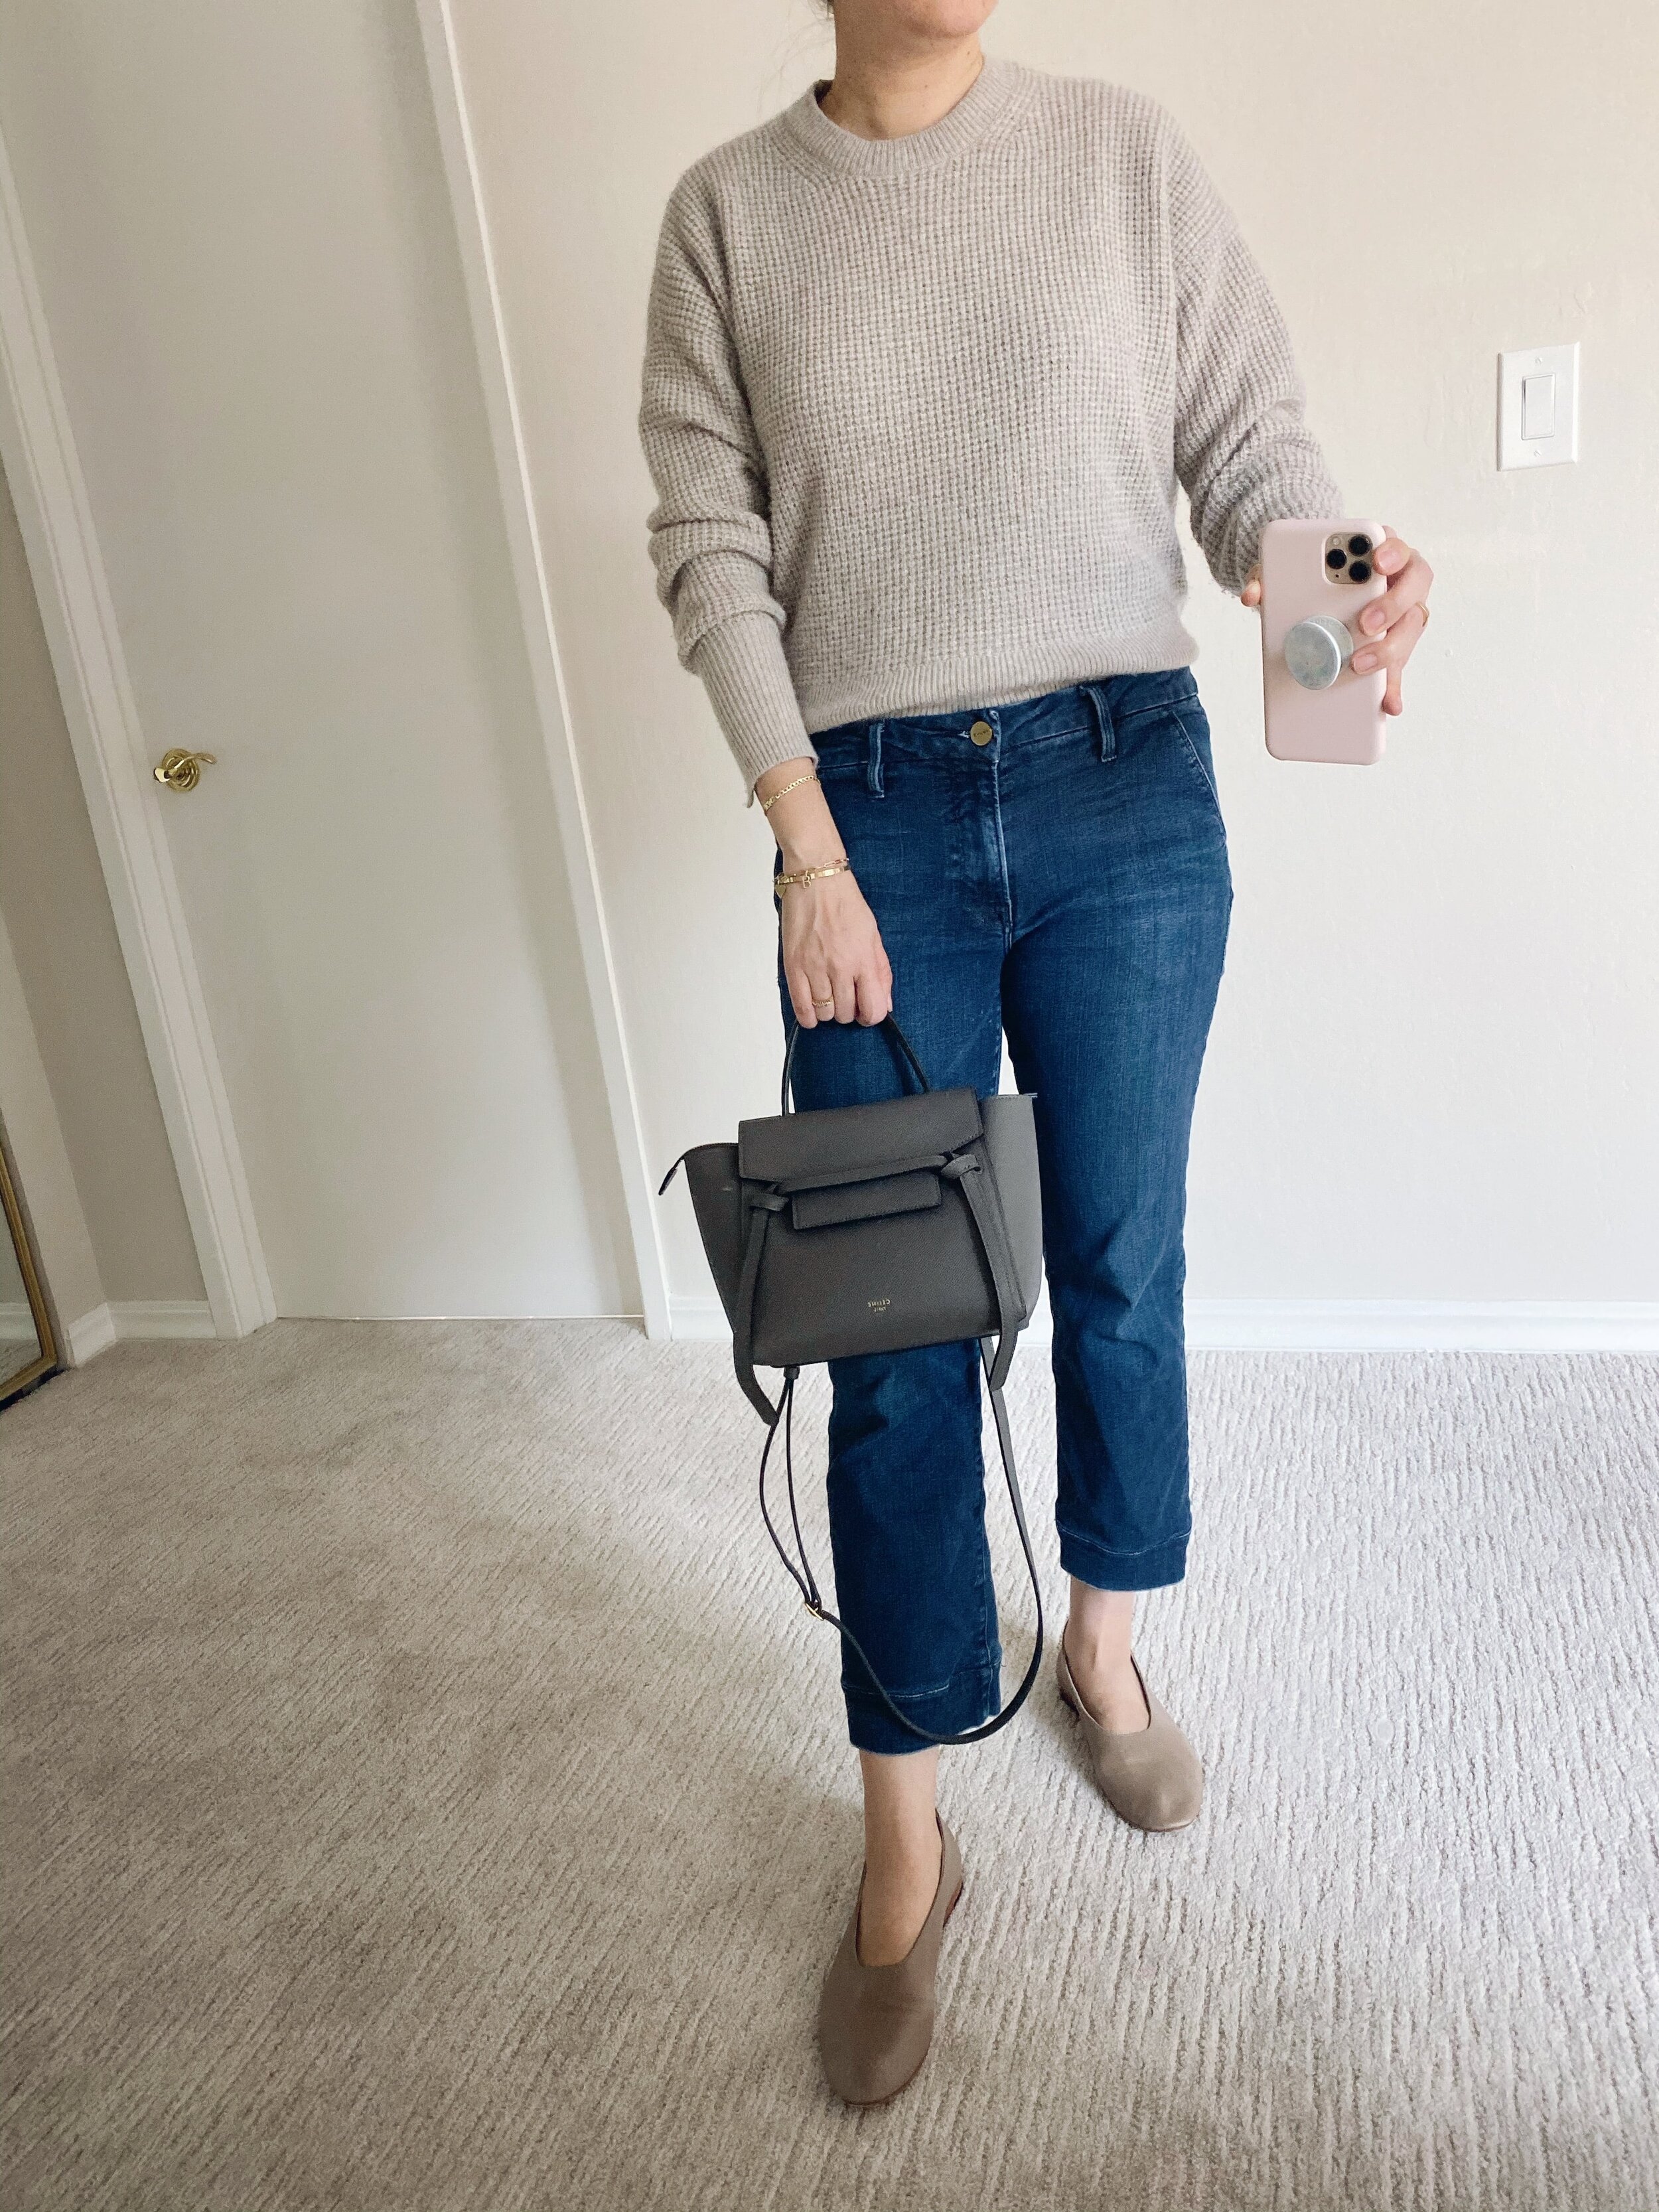 Frame jeans review—are they worth the splurge?